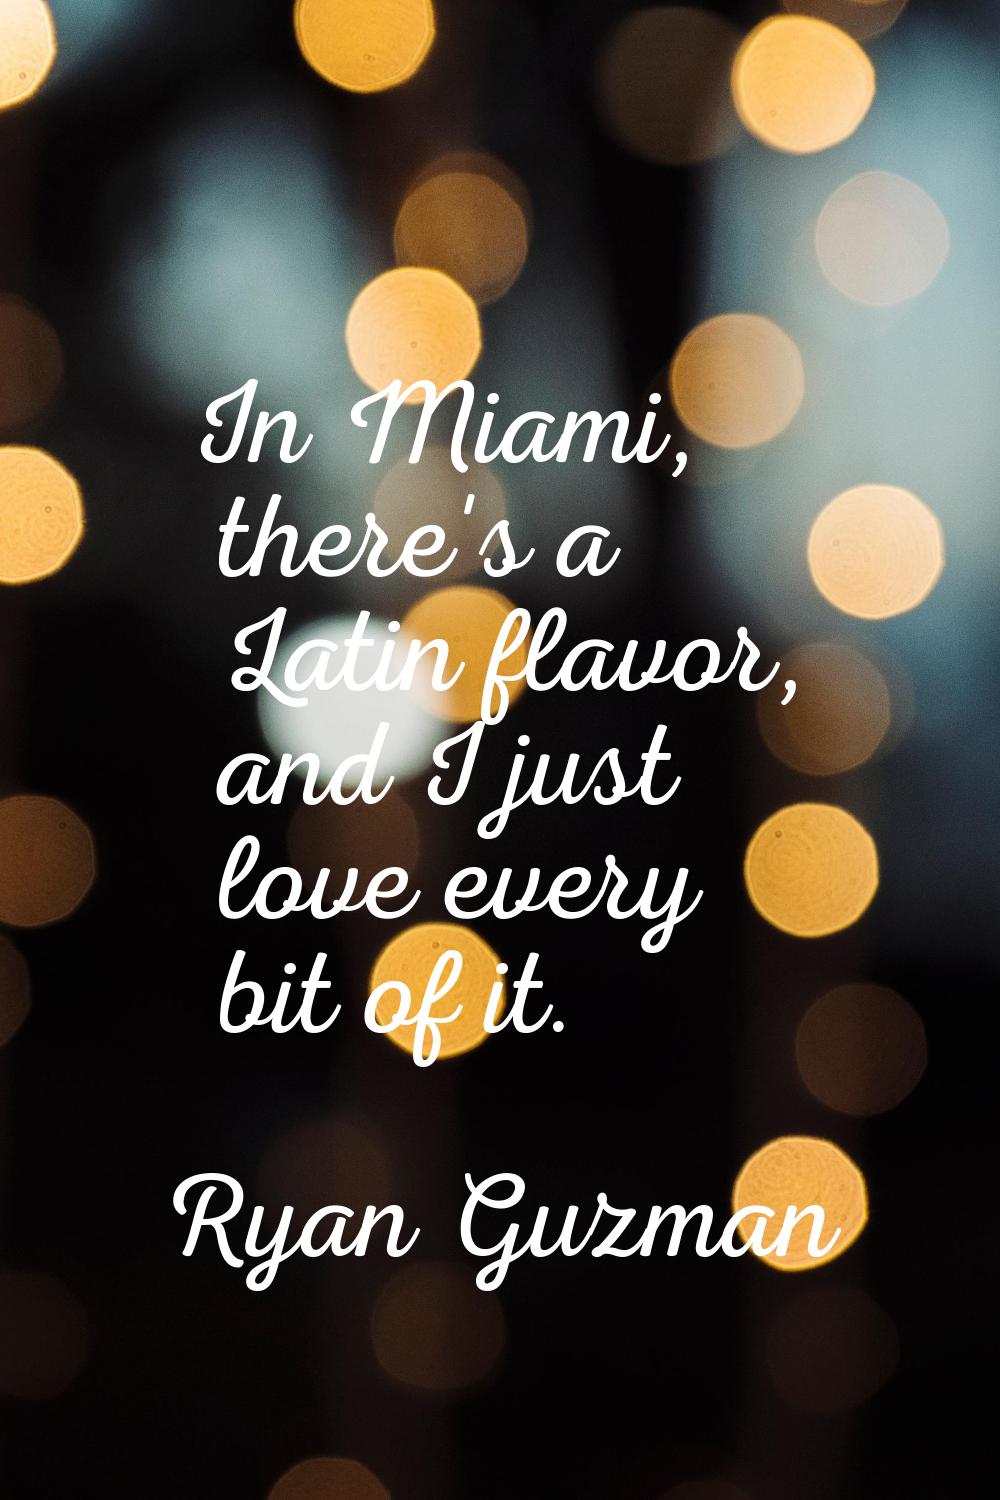 In Miami, there's a Latin flavor, and I just love every bit of it.